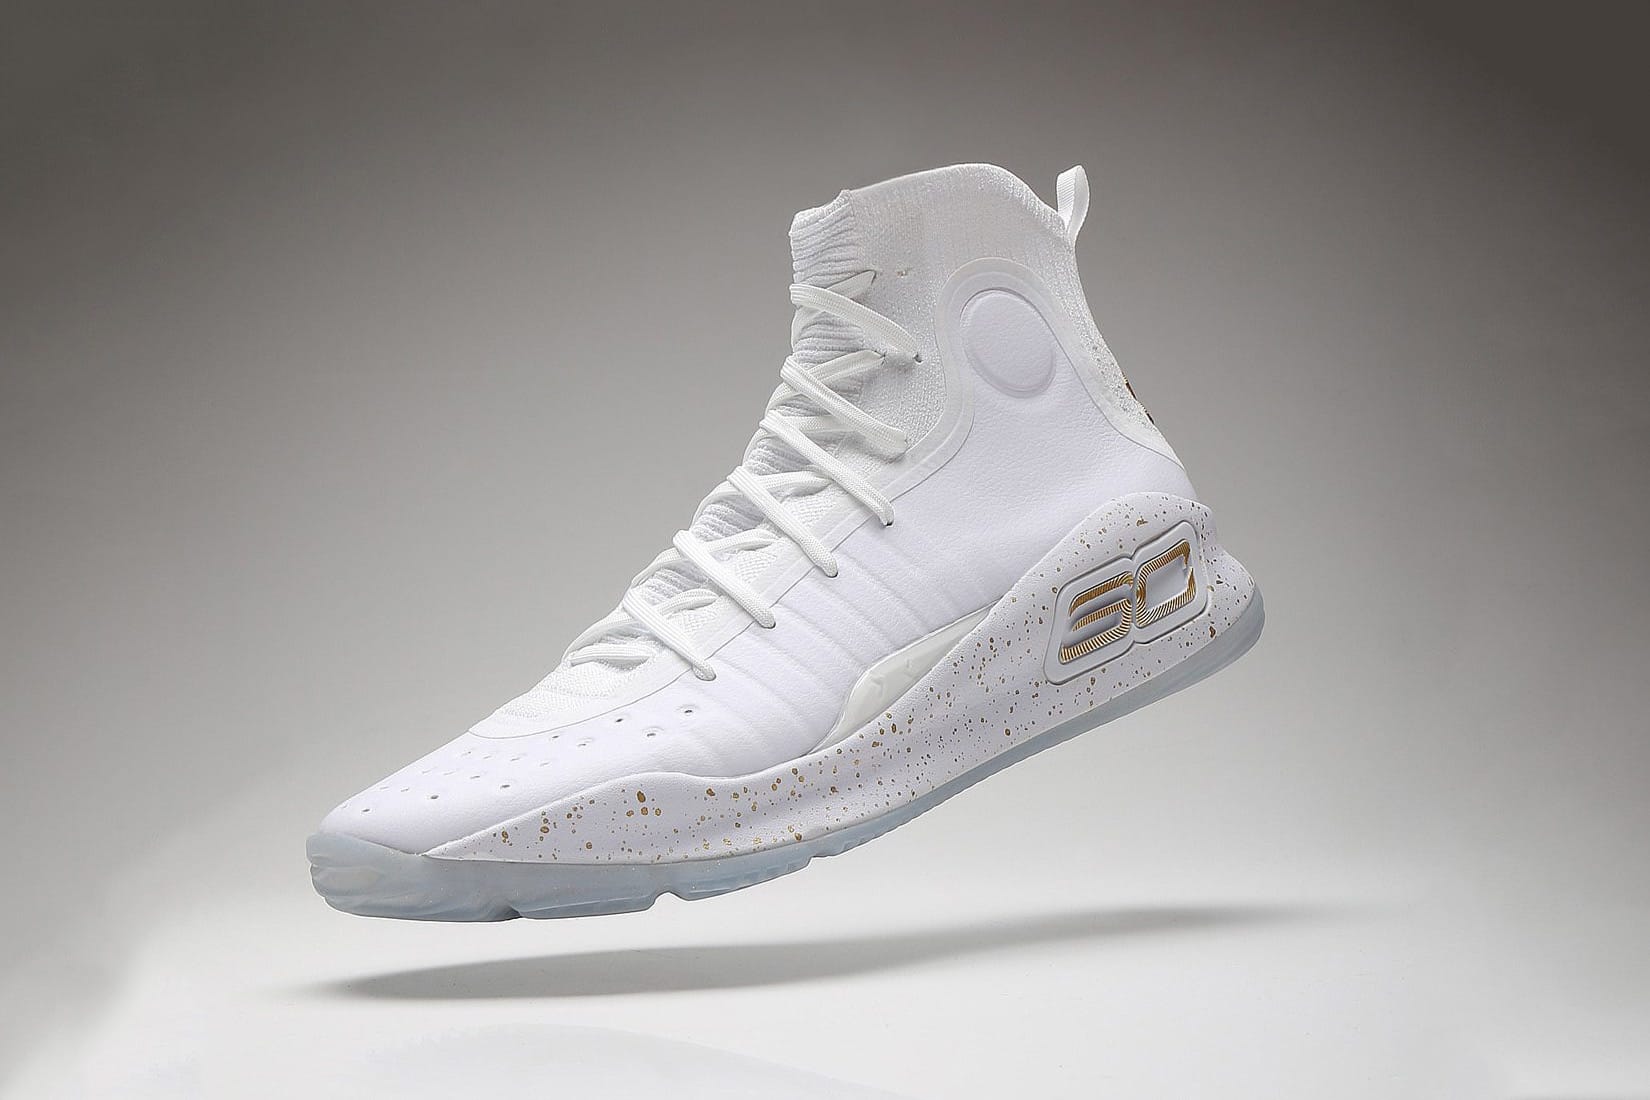 Under Armour Curry 4 Closer Look 